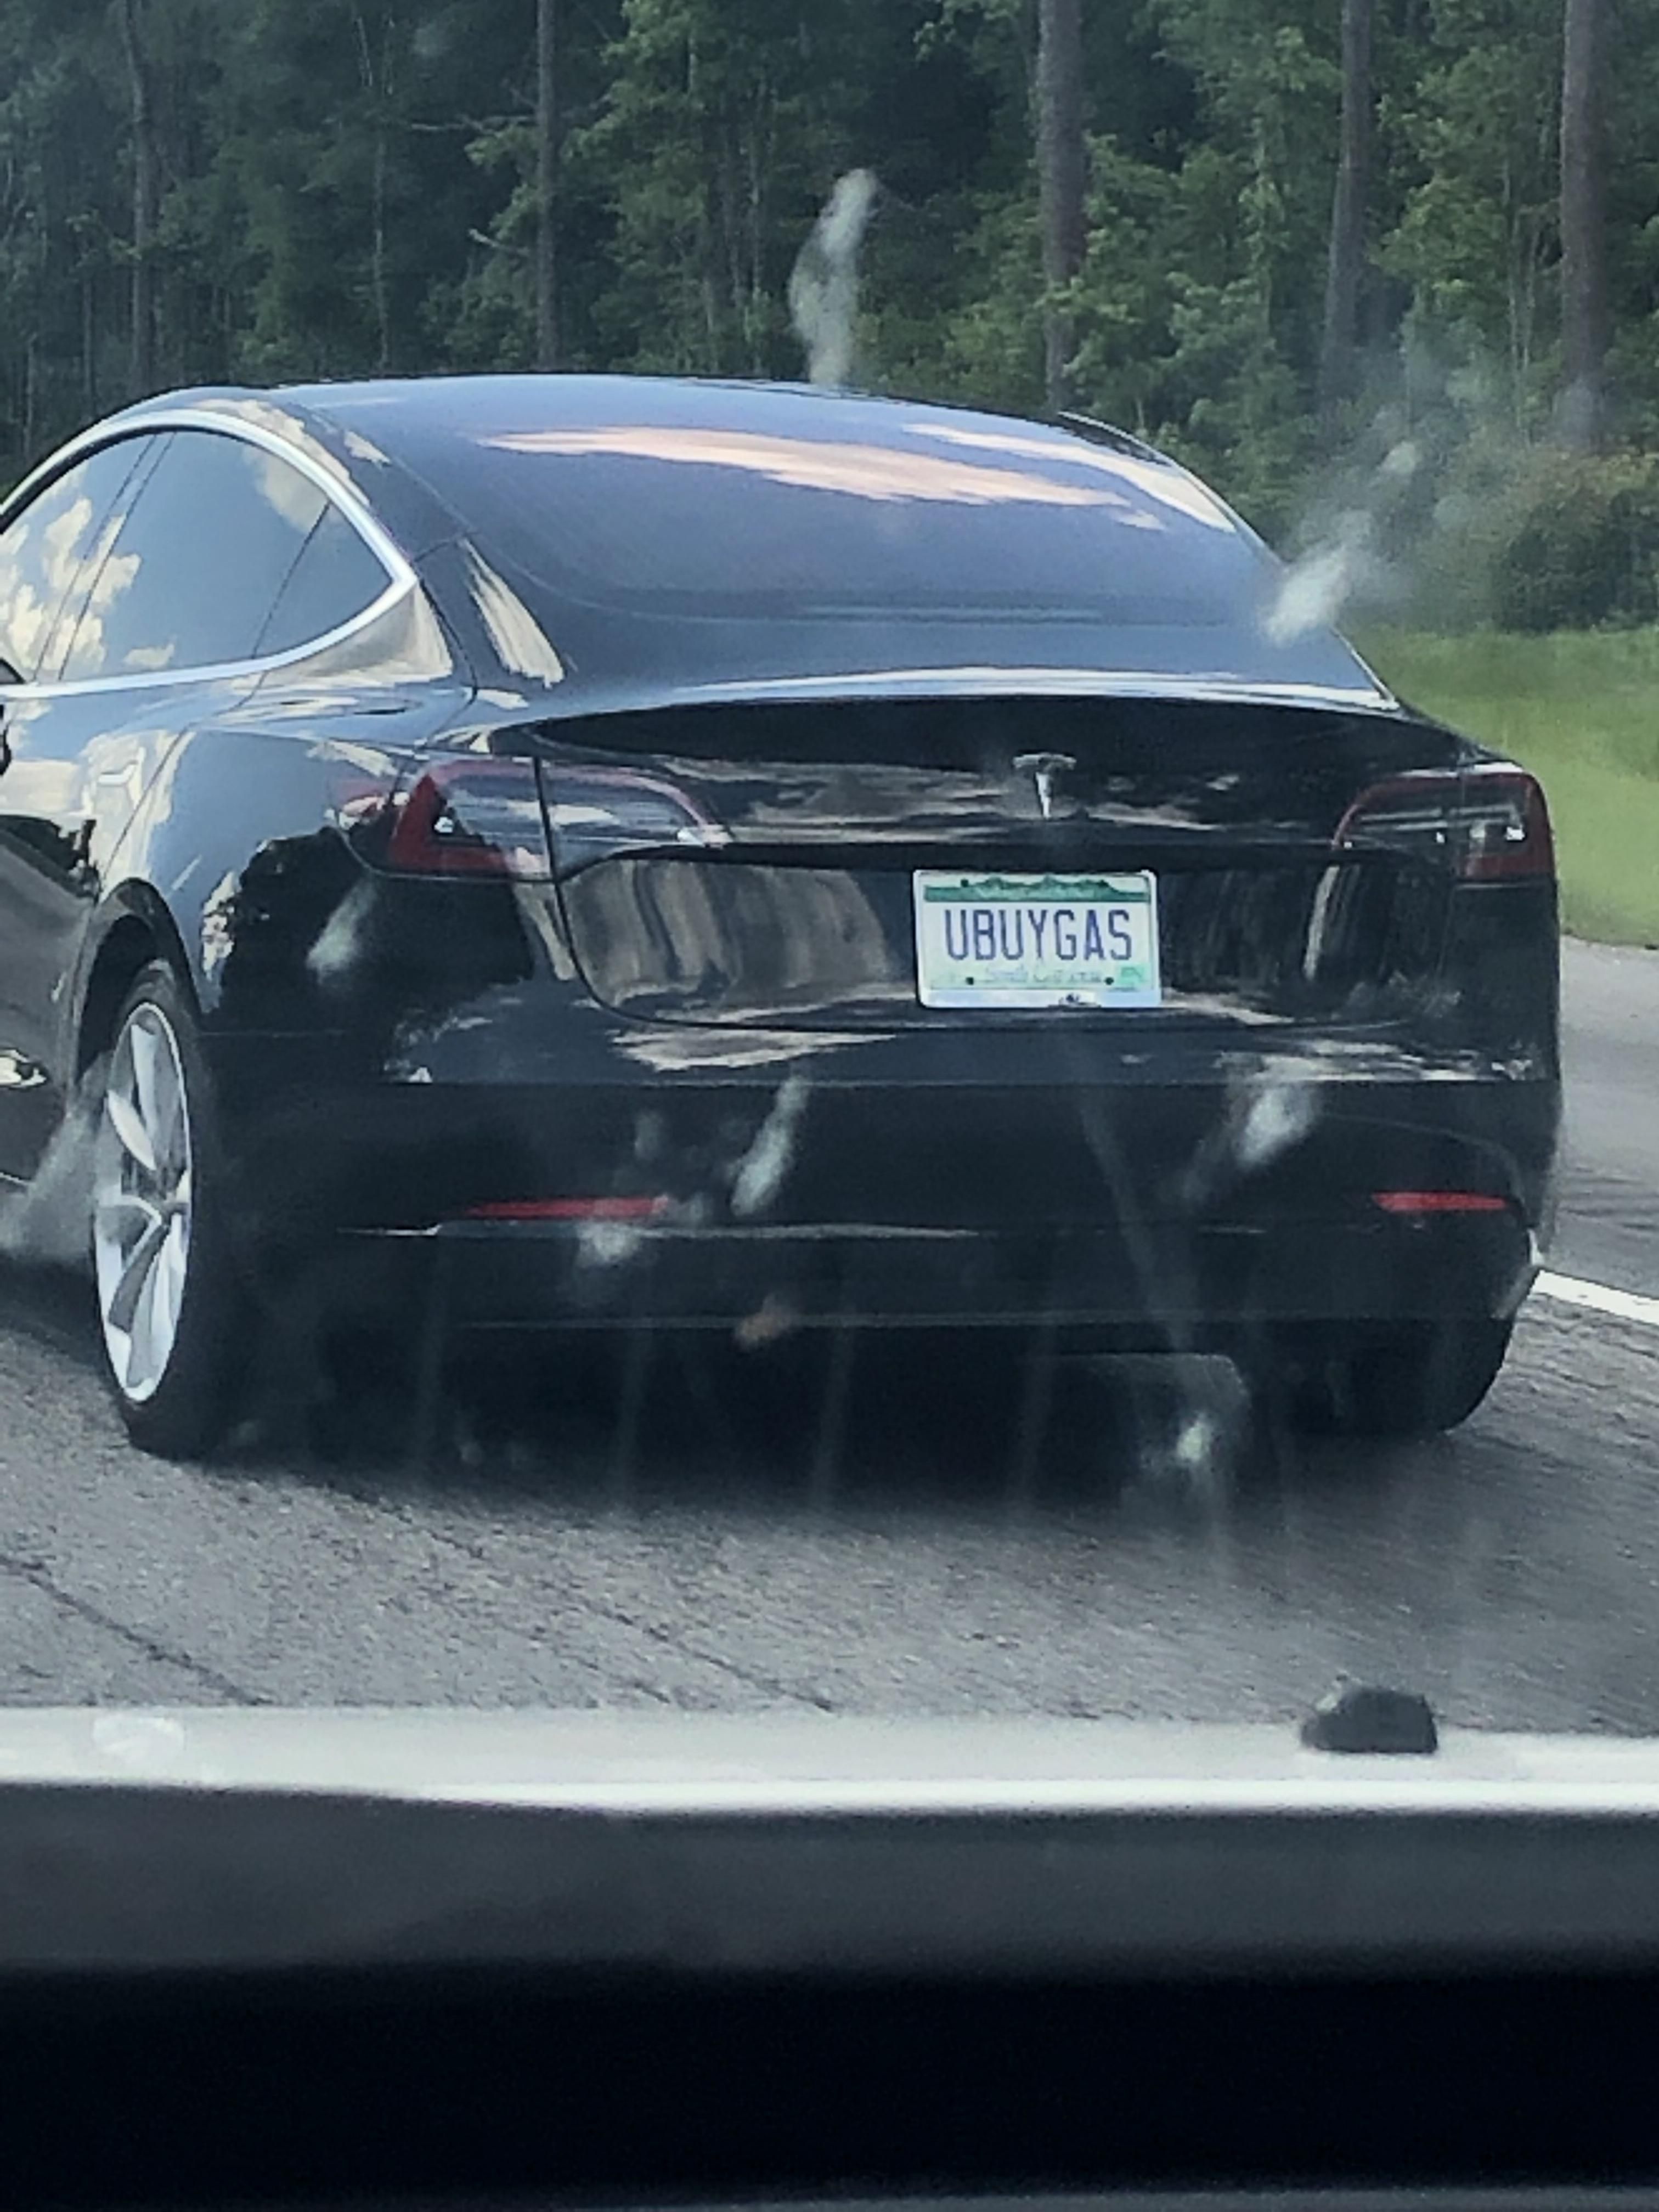 This tesla keeps flexing on me and it’s hurting my feelings